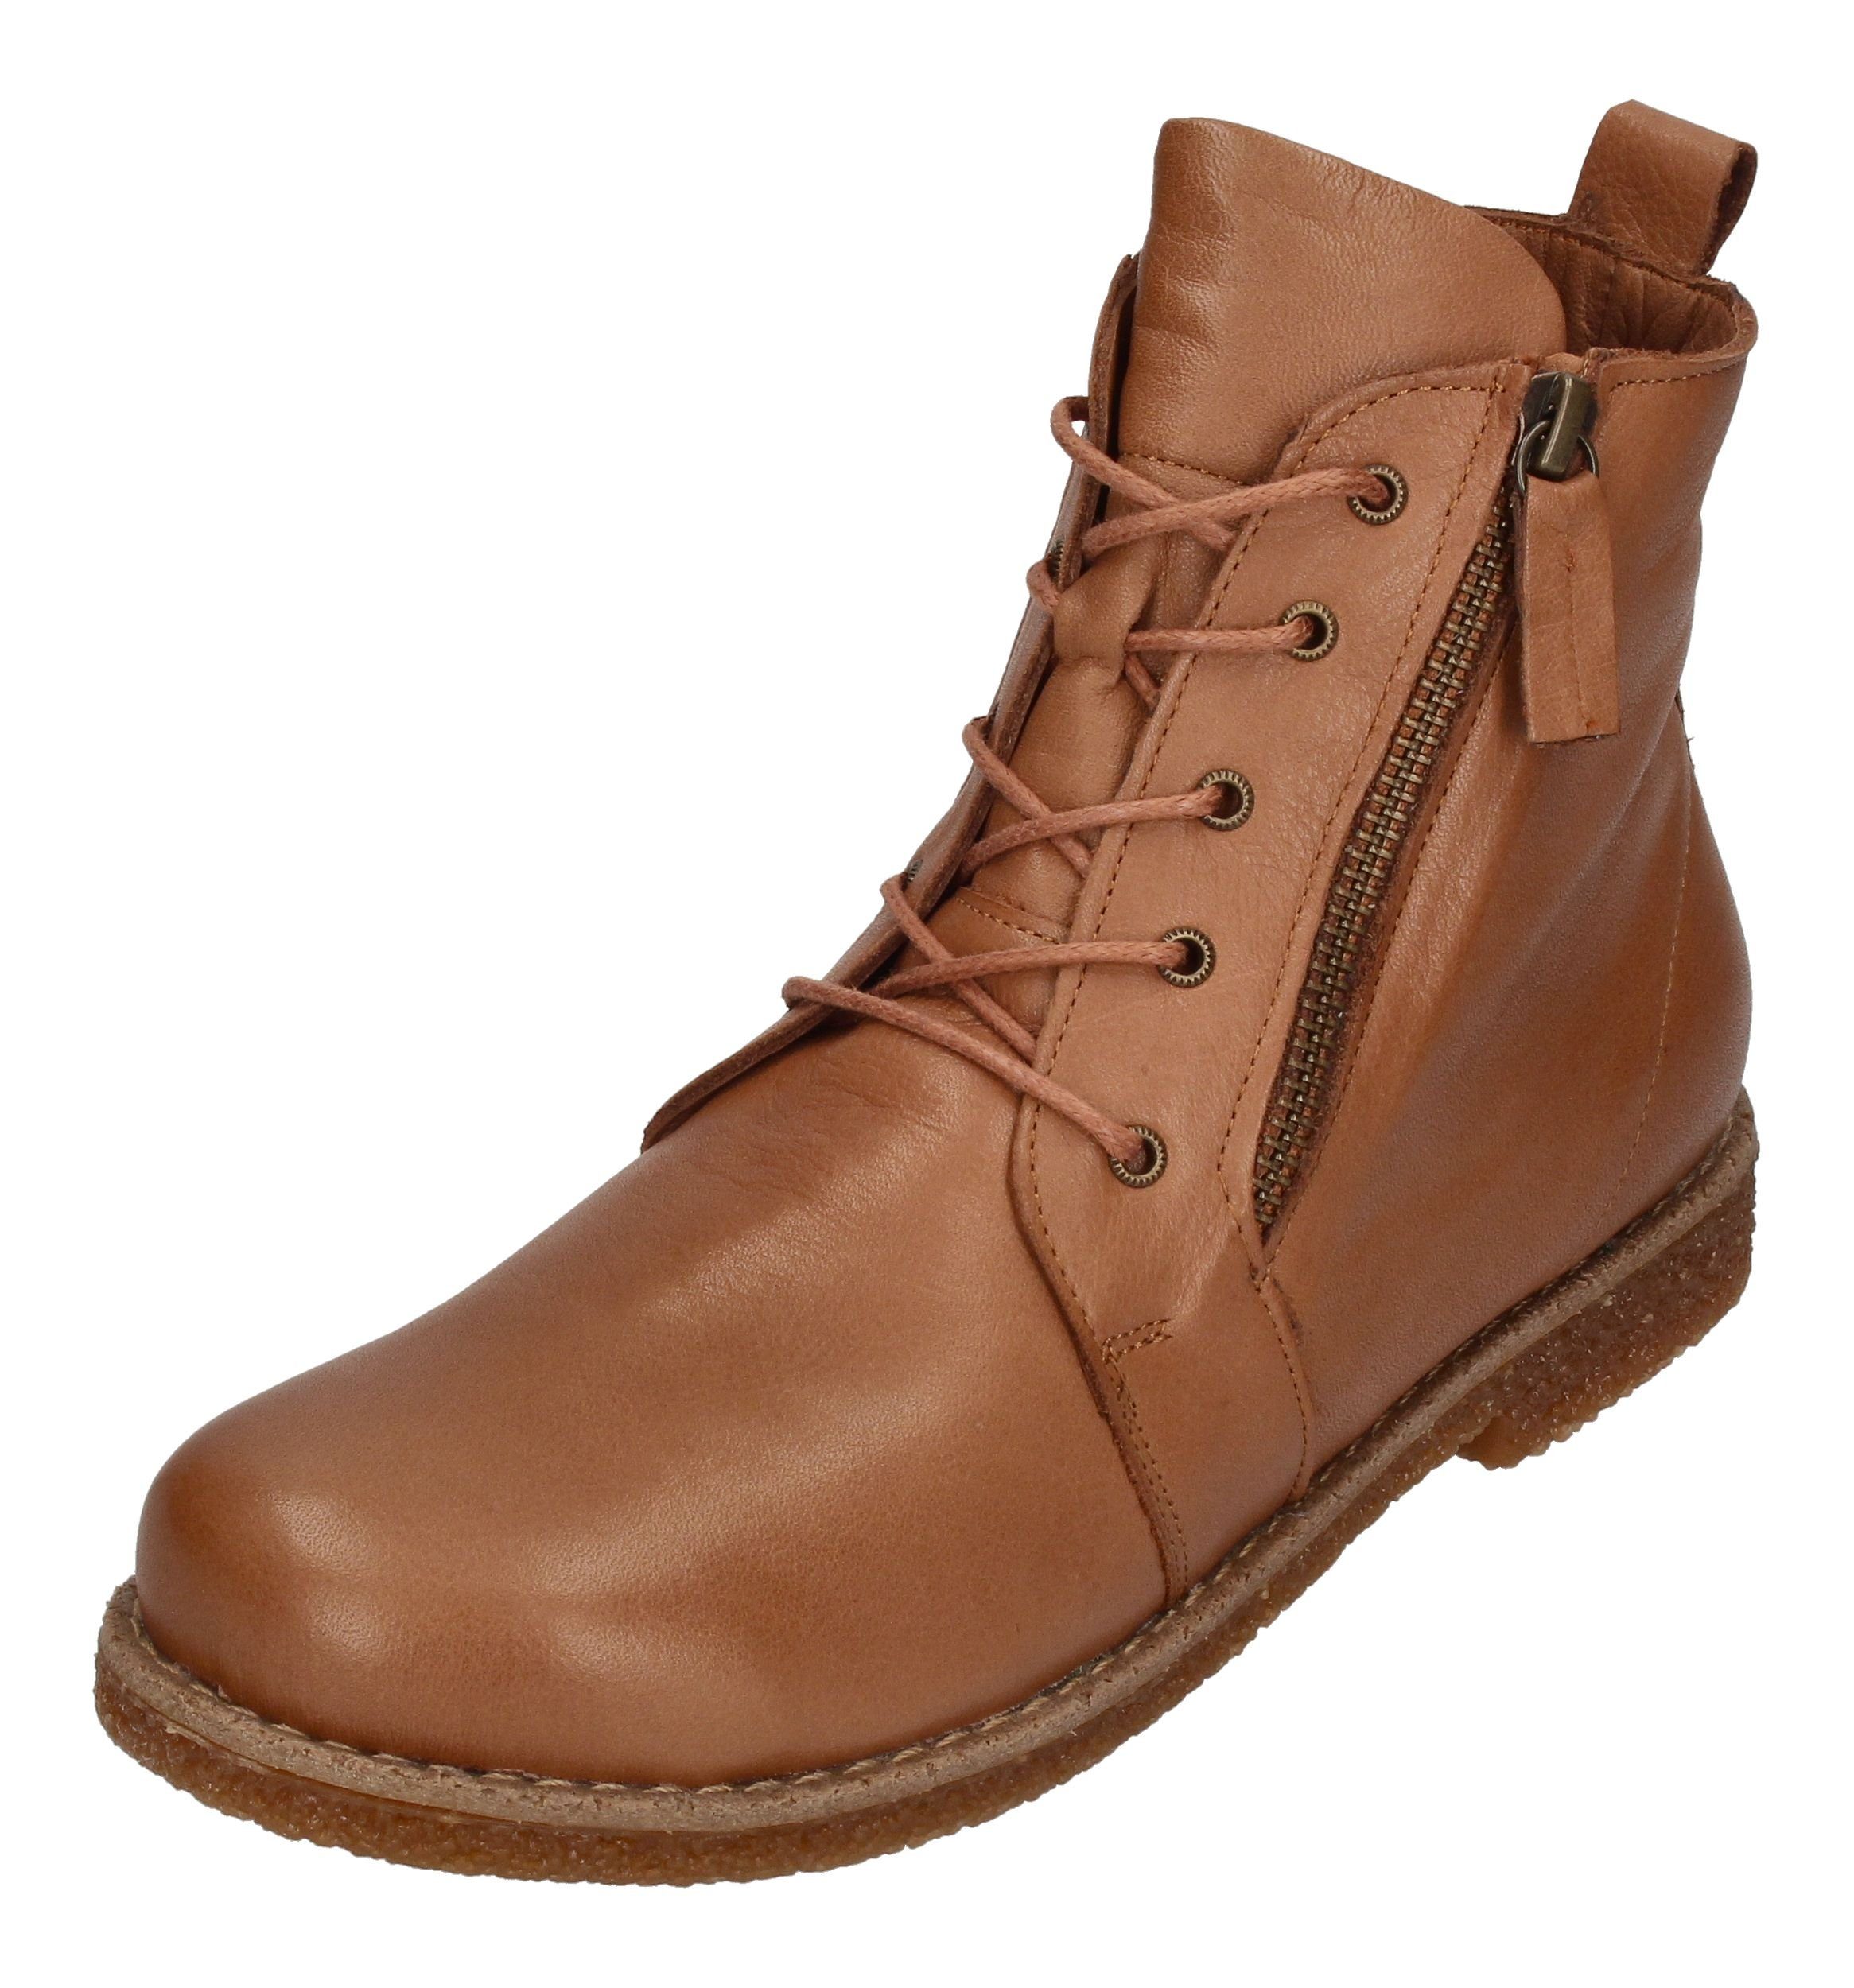 Chelseaboots Andrea Conti Braun 0348893-201